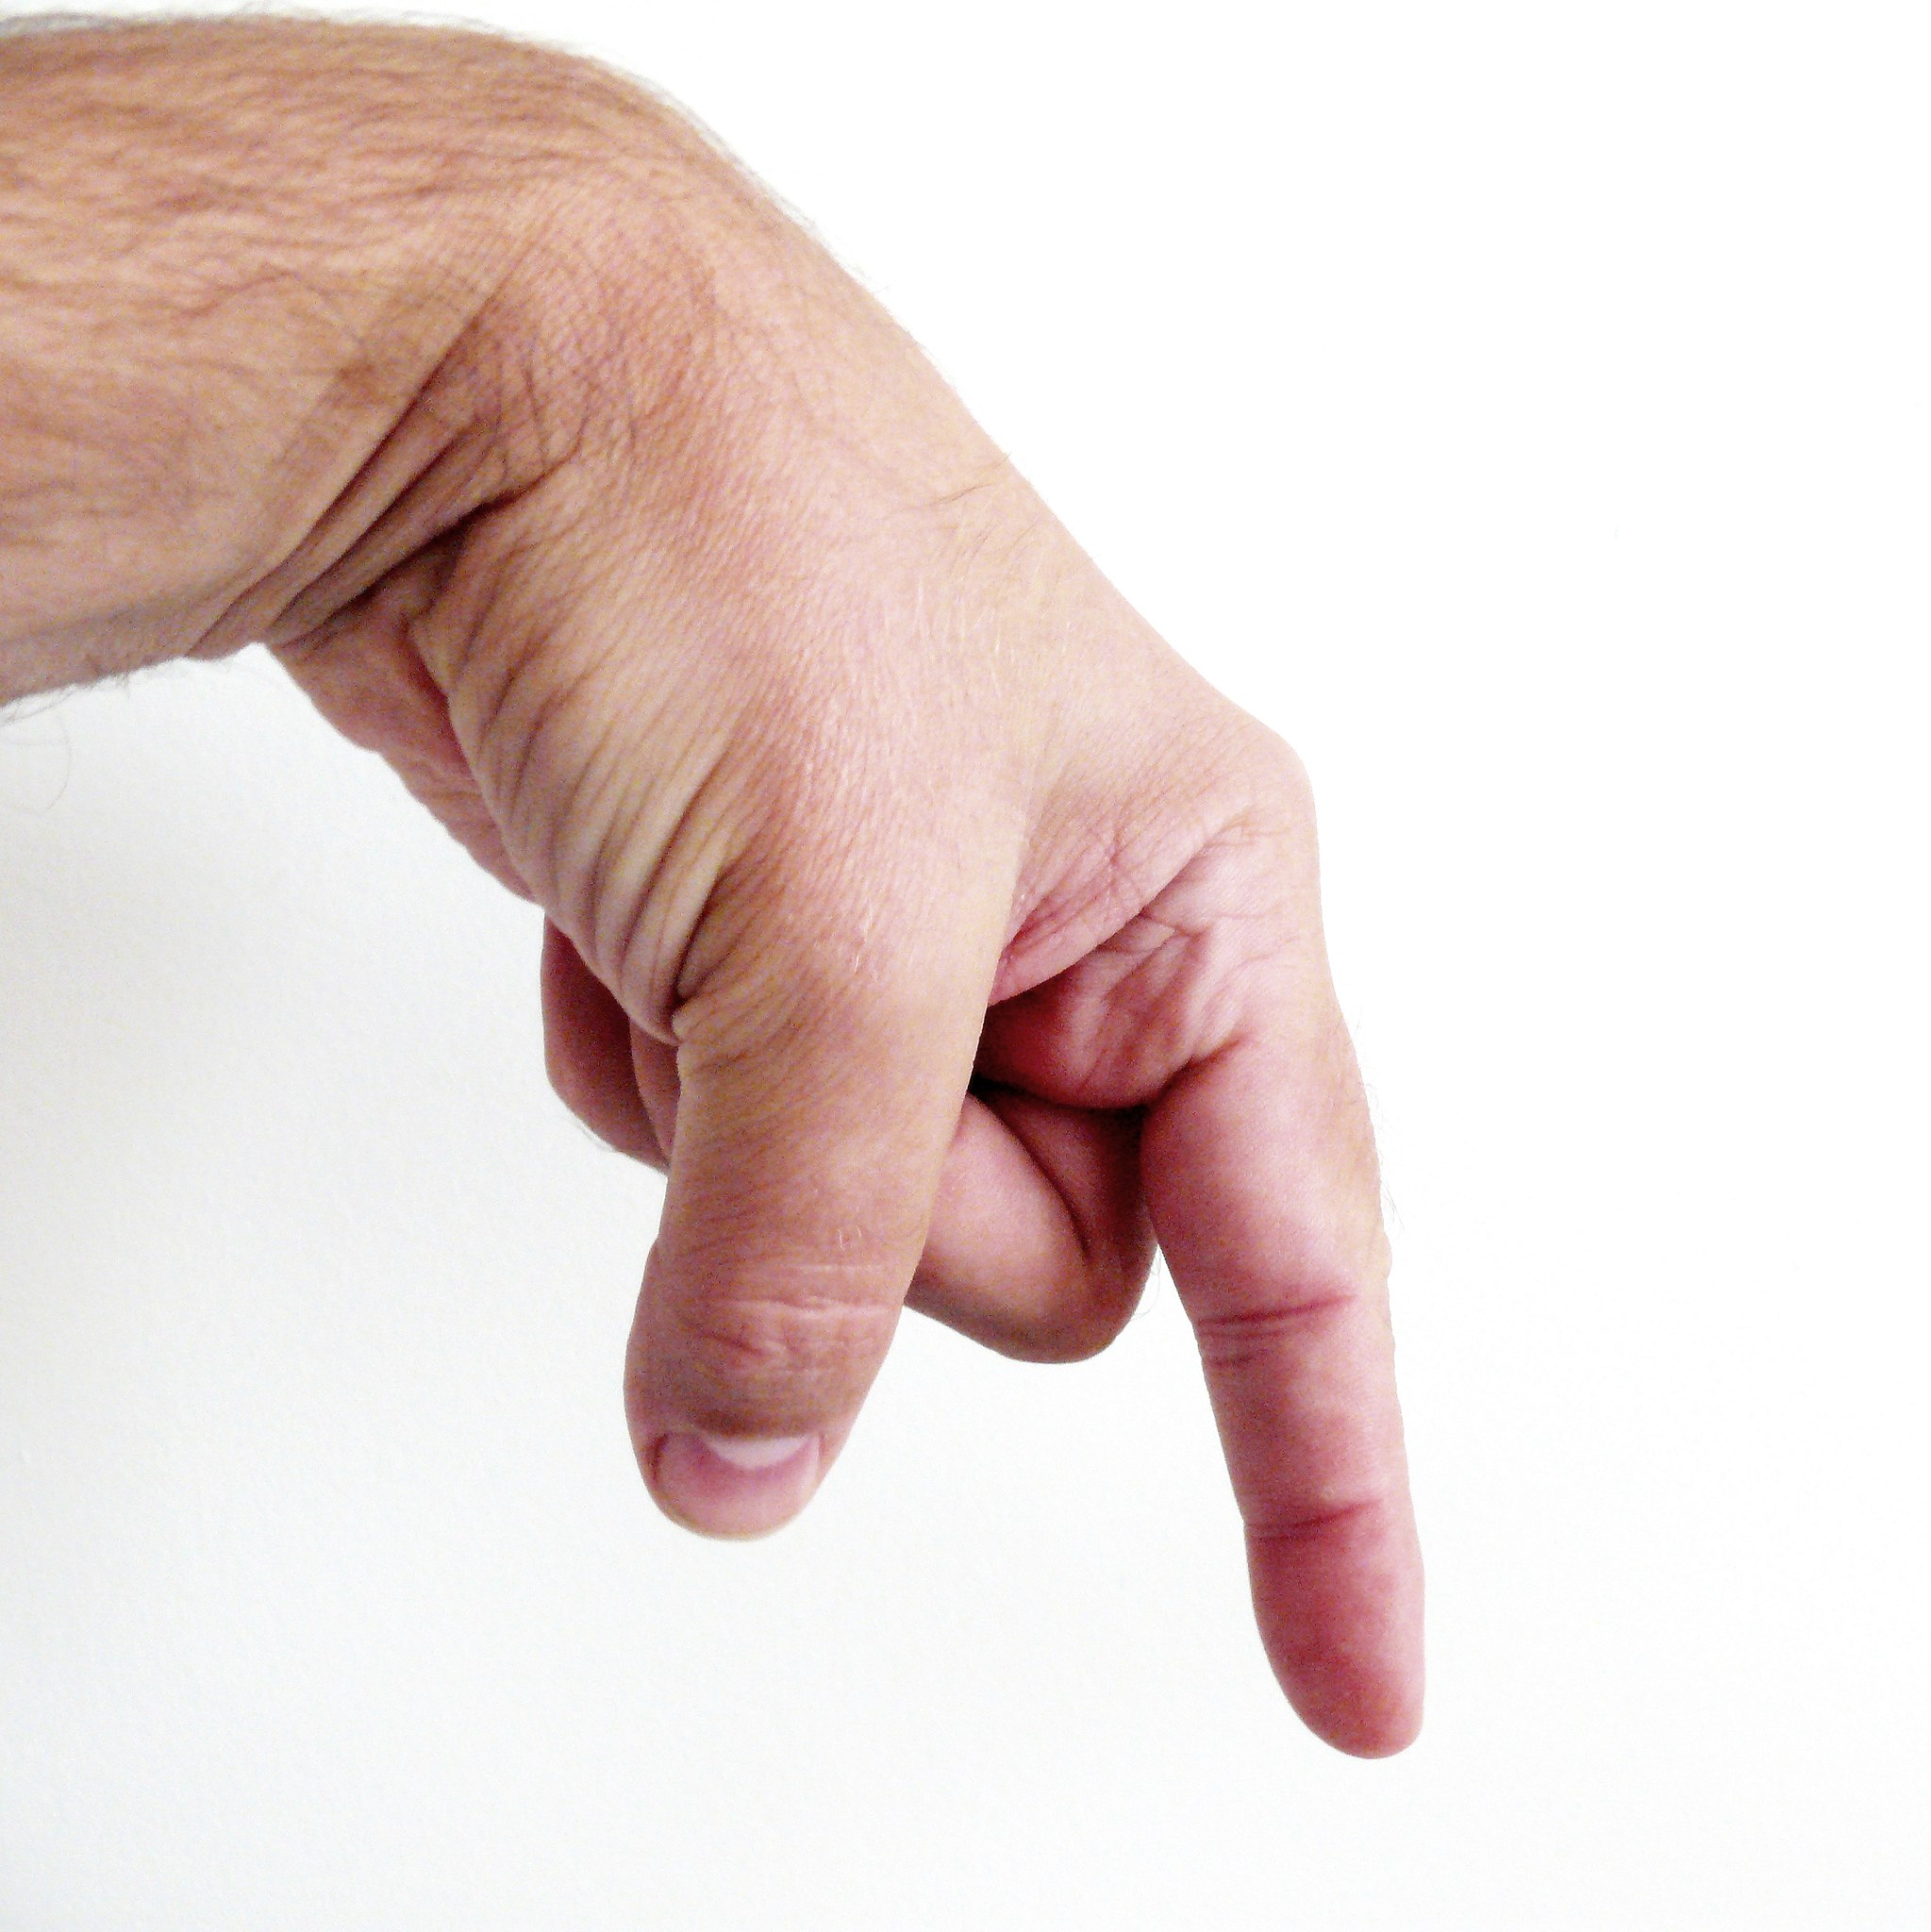 File:Index finger = attention.JPG - Wikimedia Commons